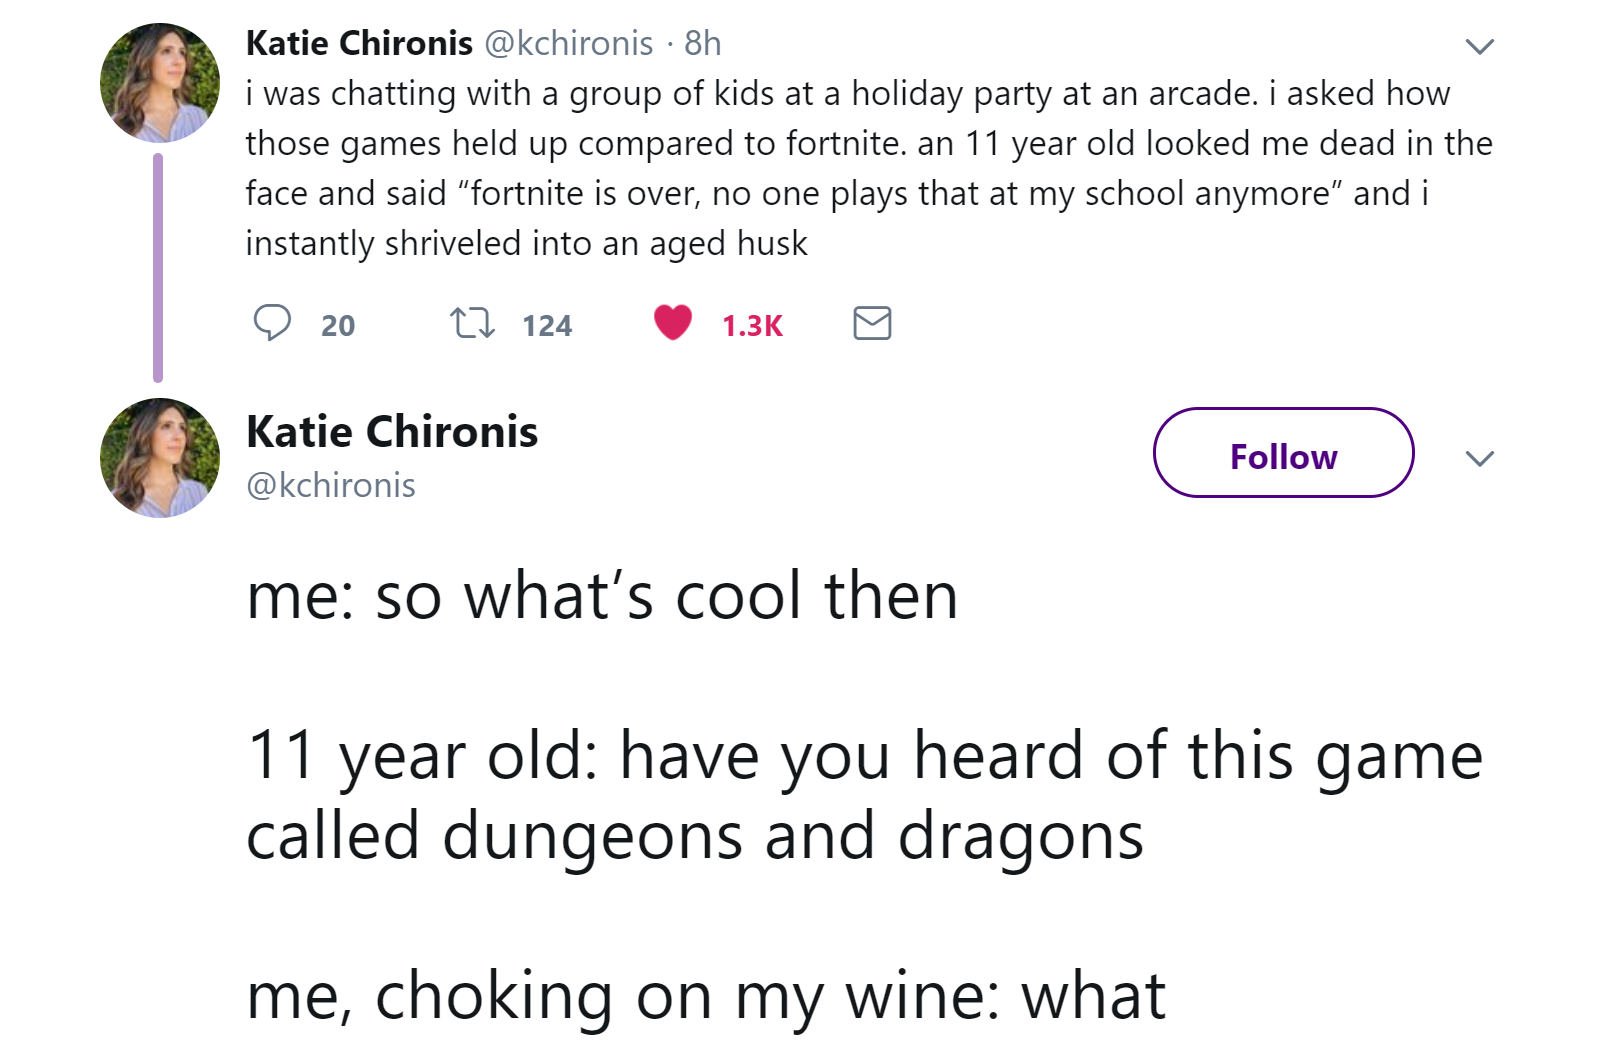 angle - Katie Chironis 8h i was chatting with a group of kids at a holiday party at an arcade. I asked how those games held up compared to fortnite. an 11 year old looked me dead in the face and said "fortnite is over, no one plays that at my school anymo